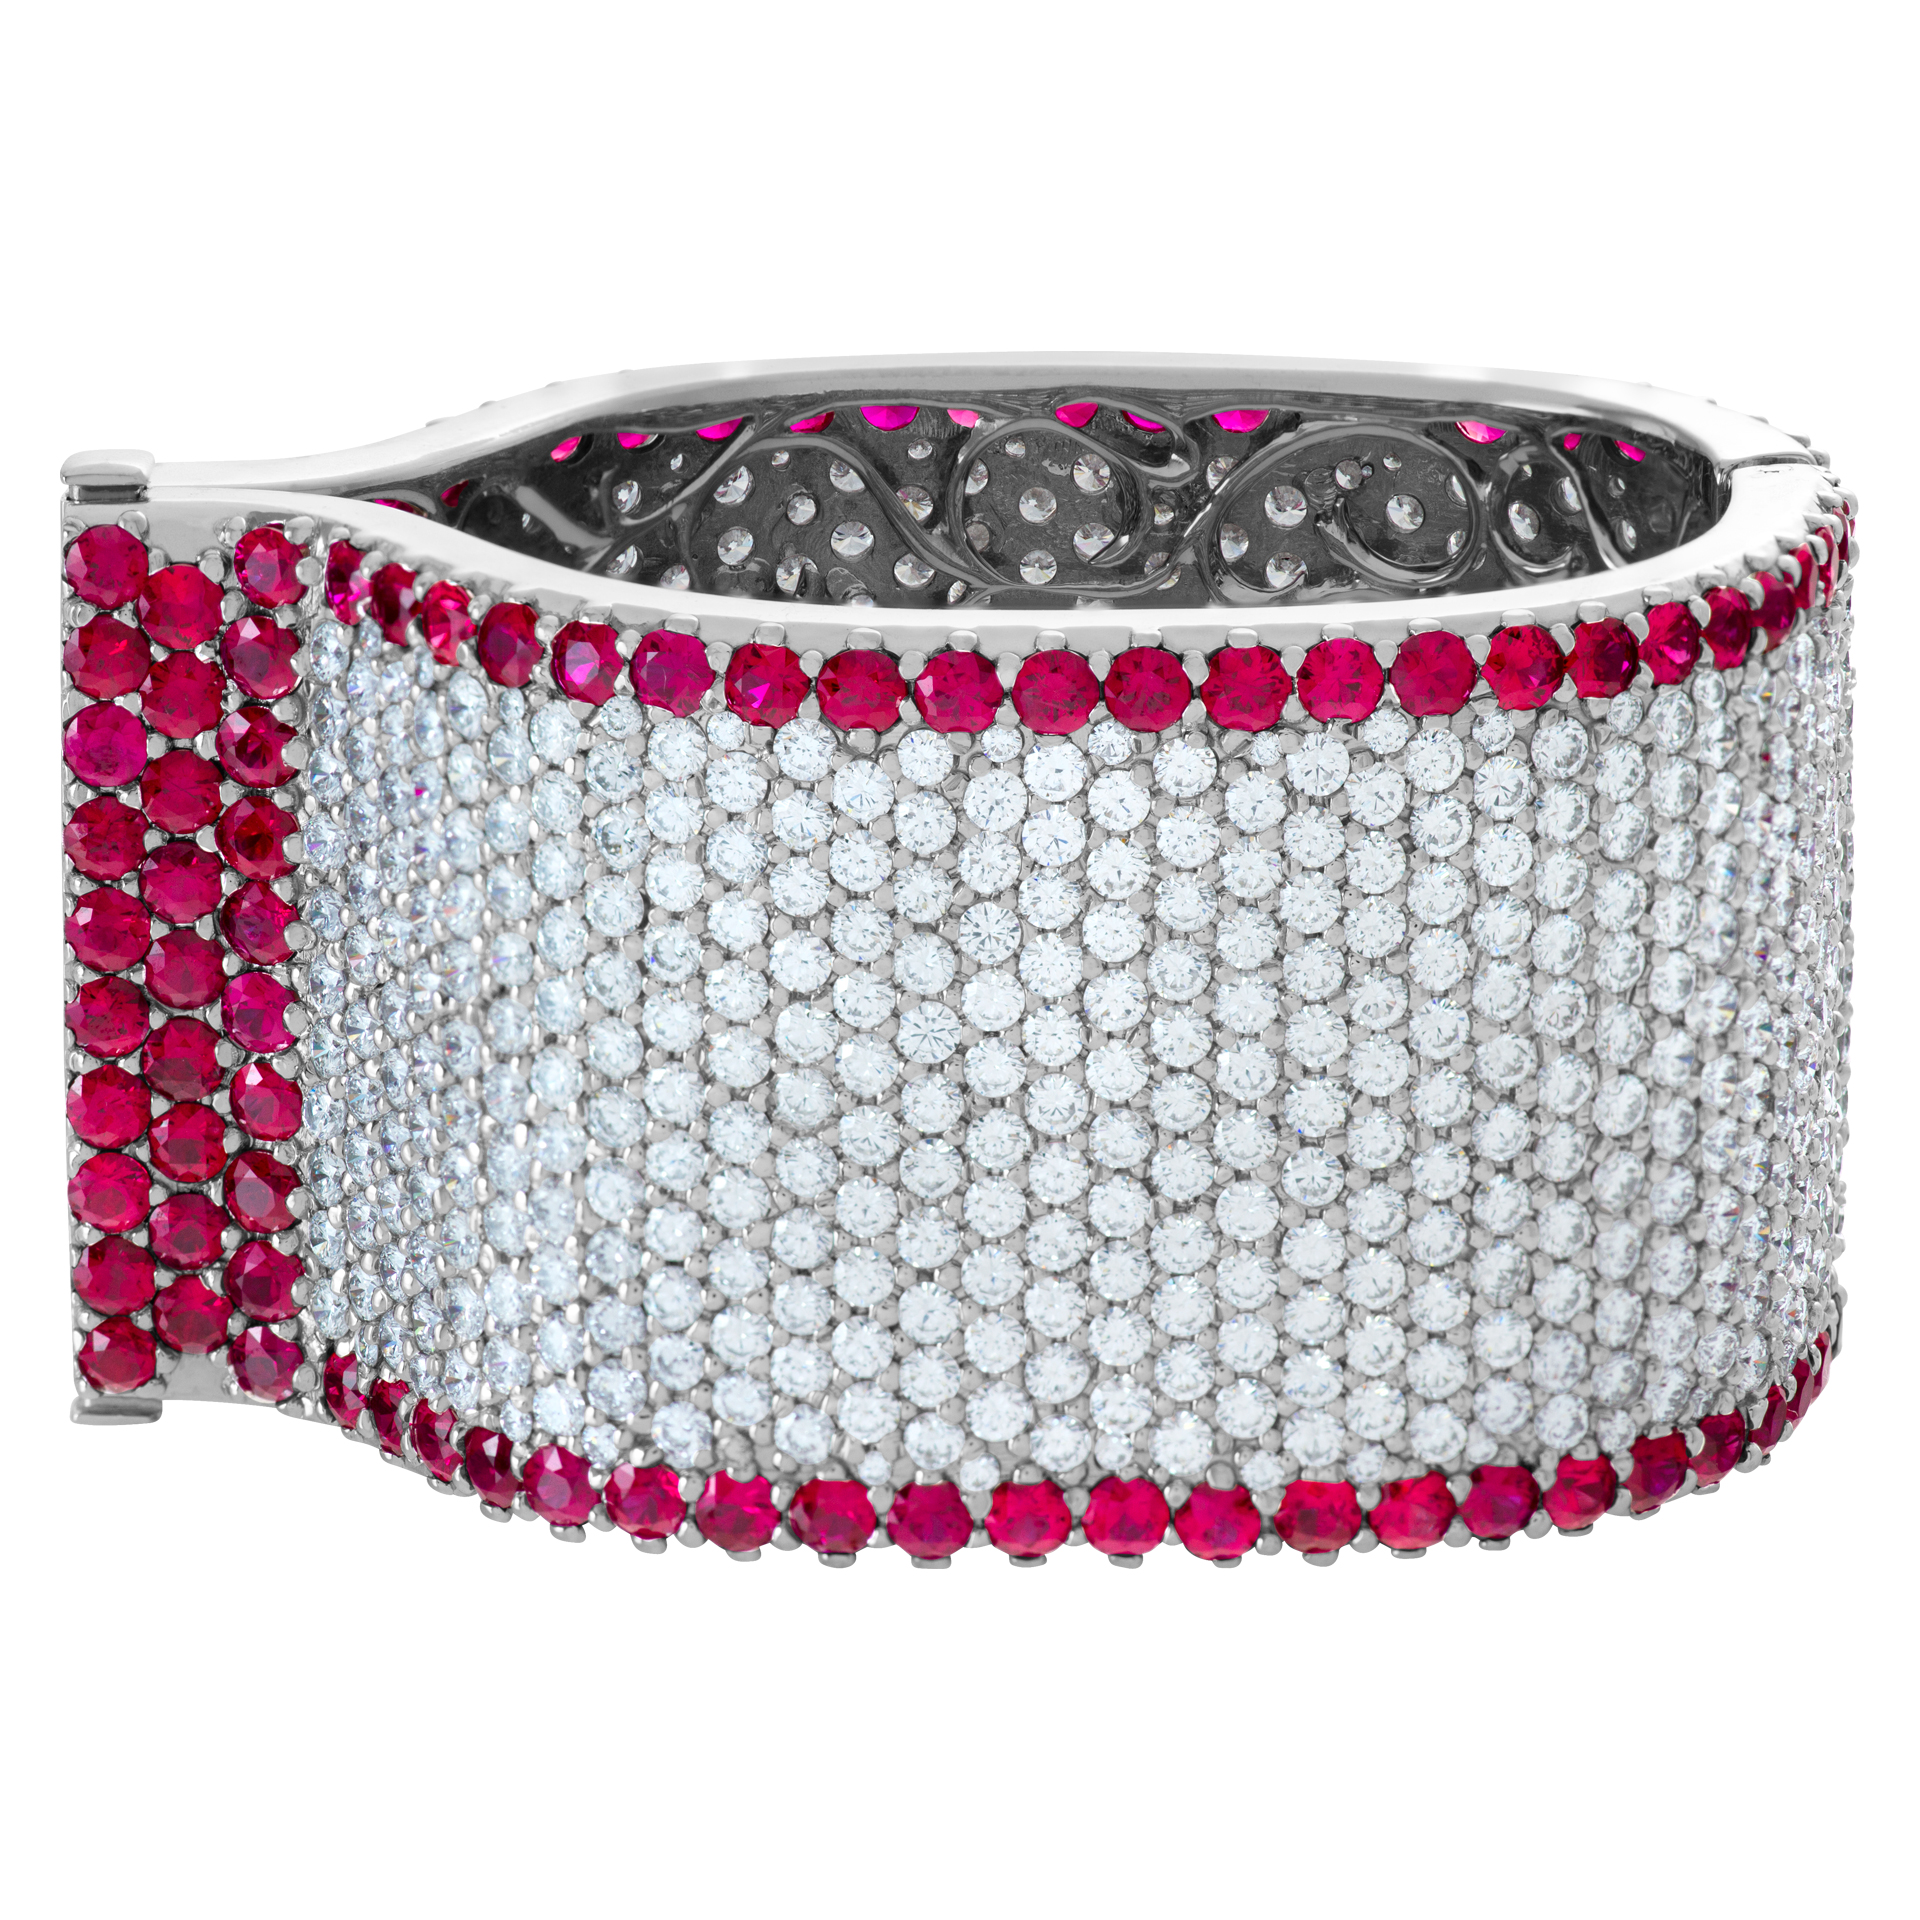 Ruby and diamond bangle in 18k white gold - Over 60 carats round brilliant diamond cut diamonds and 40 carats rubies image 1